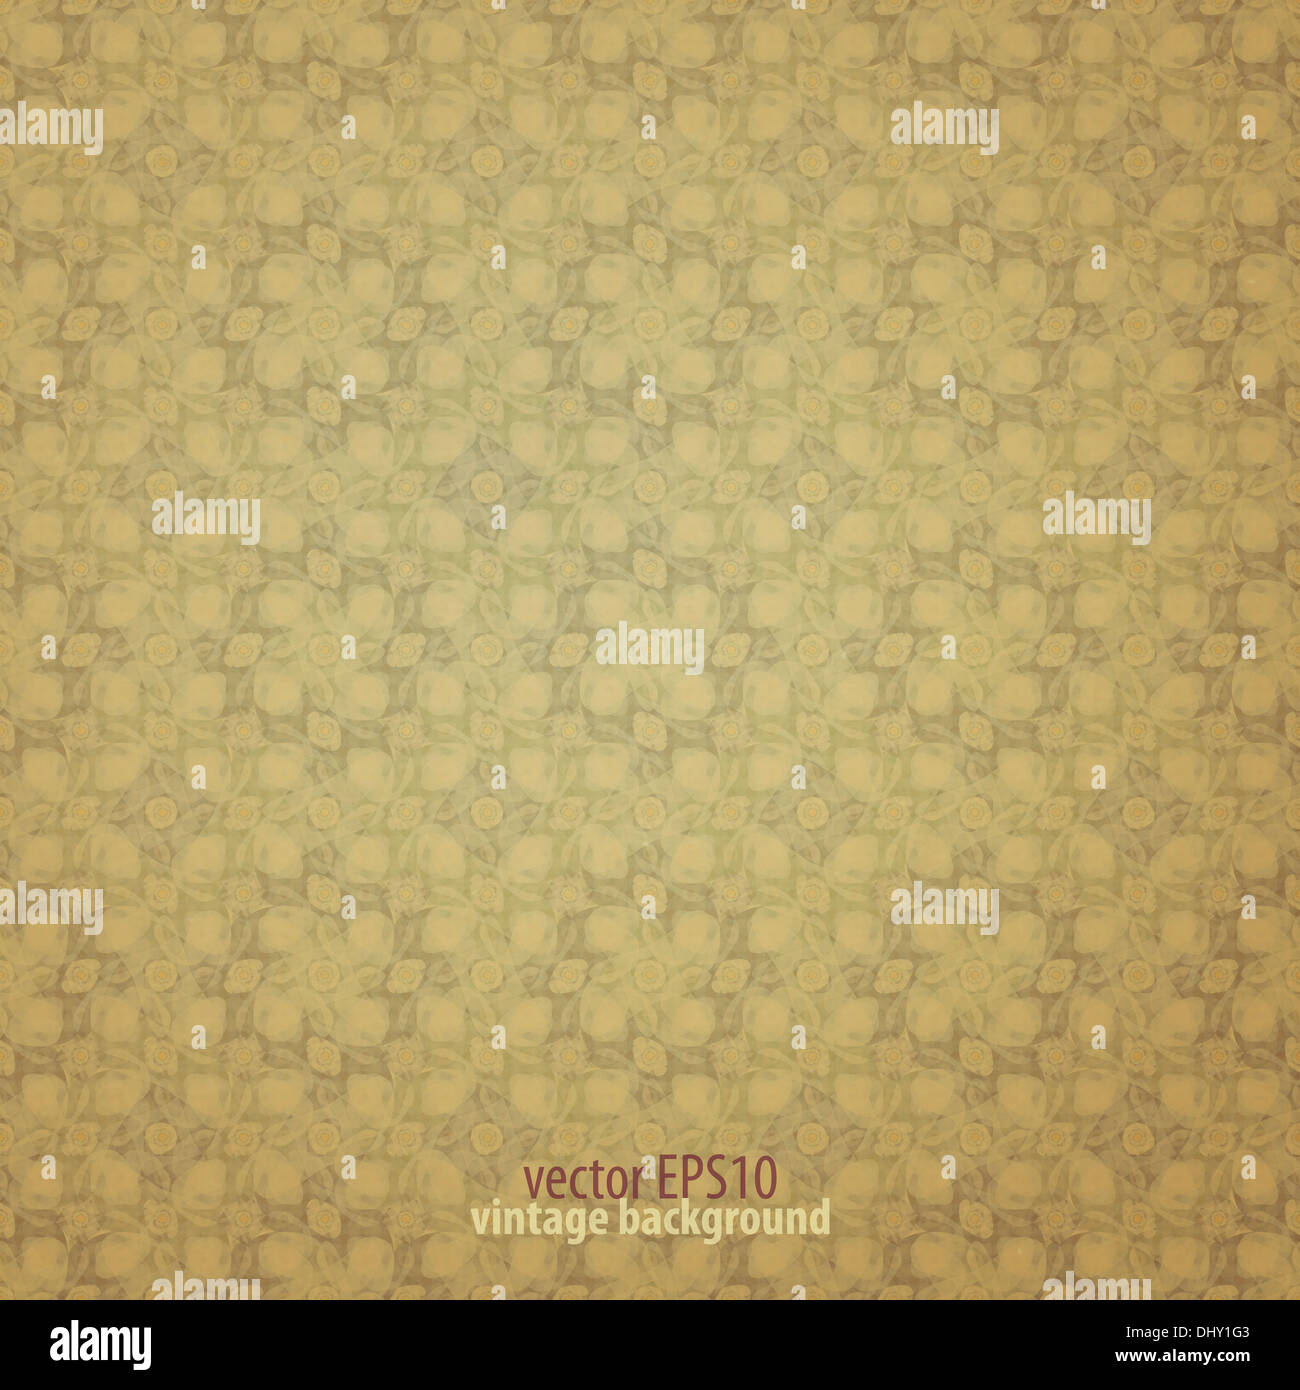 new floral background with textured surface can use like vintage wallpaper Stock Photo